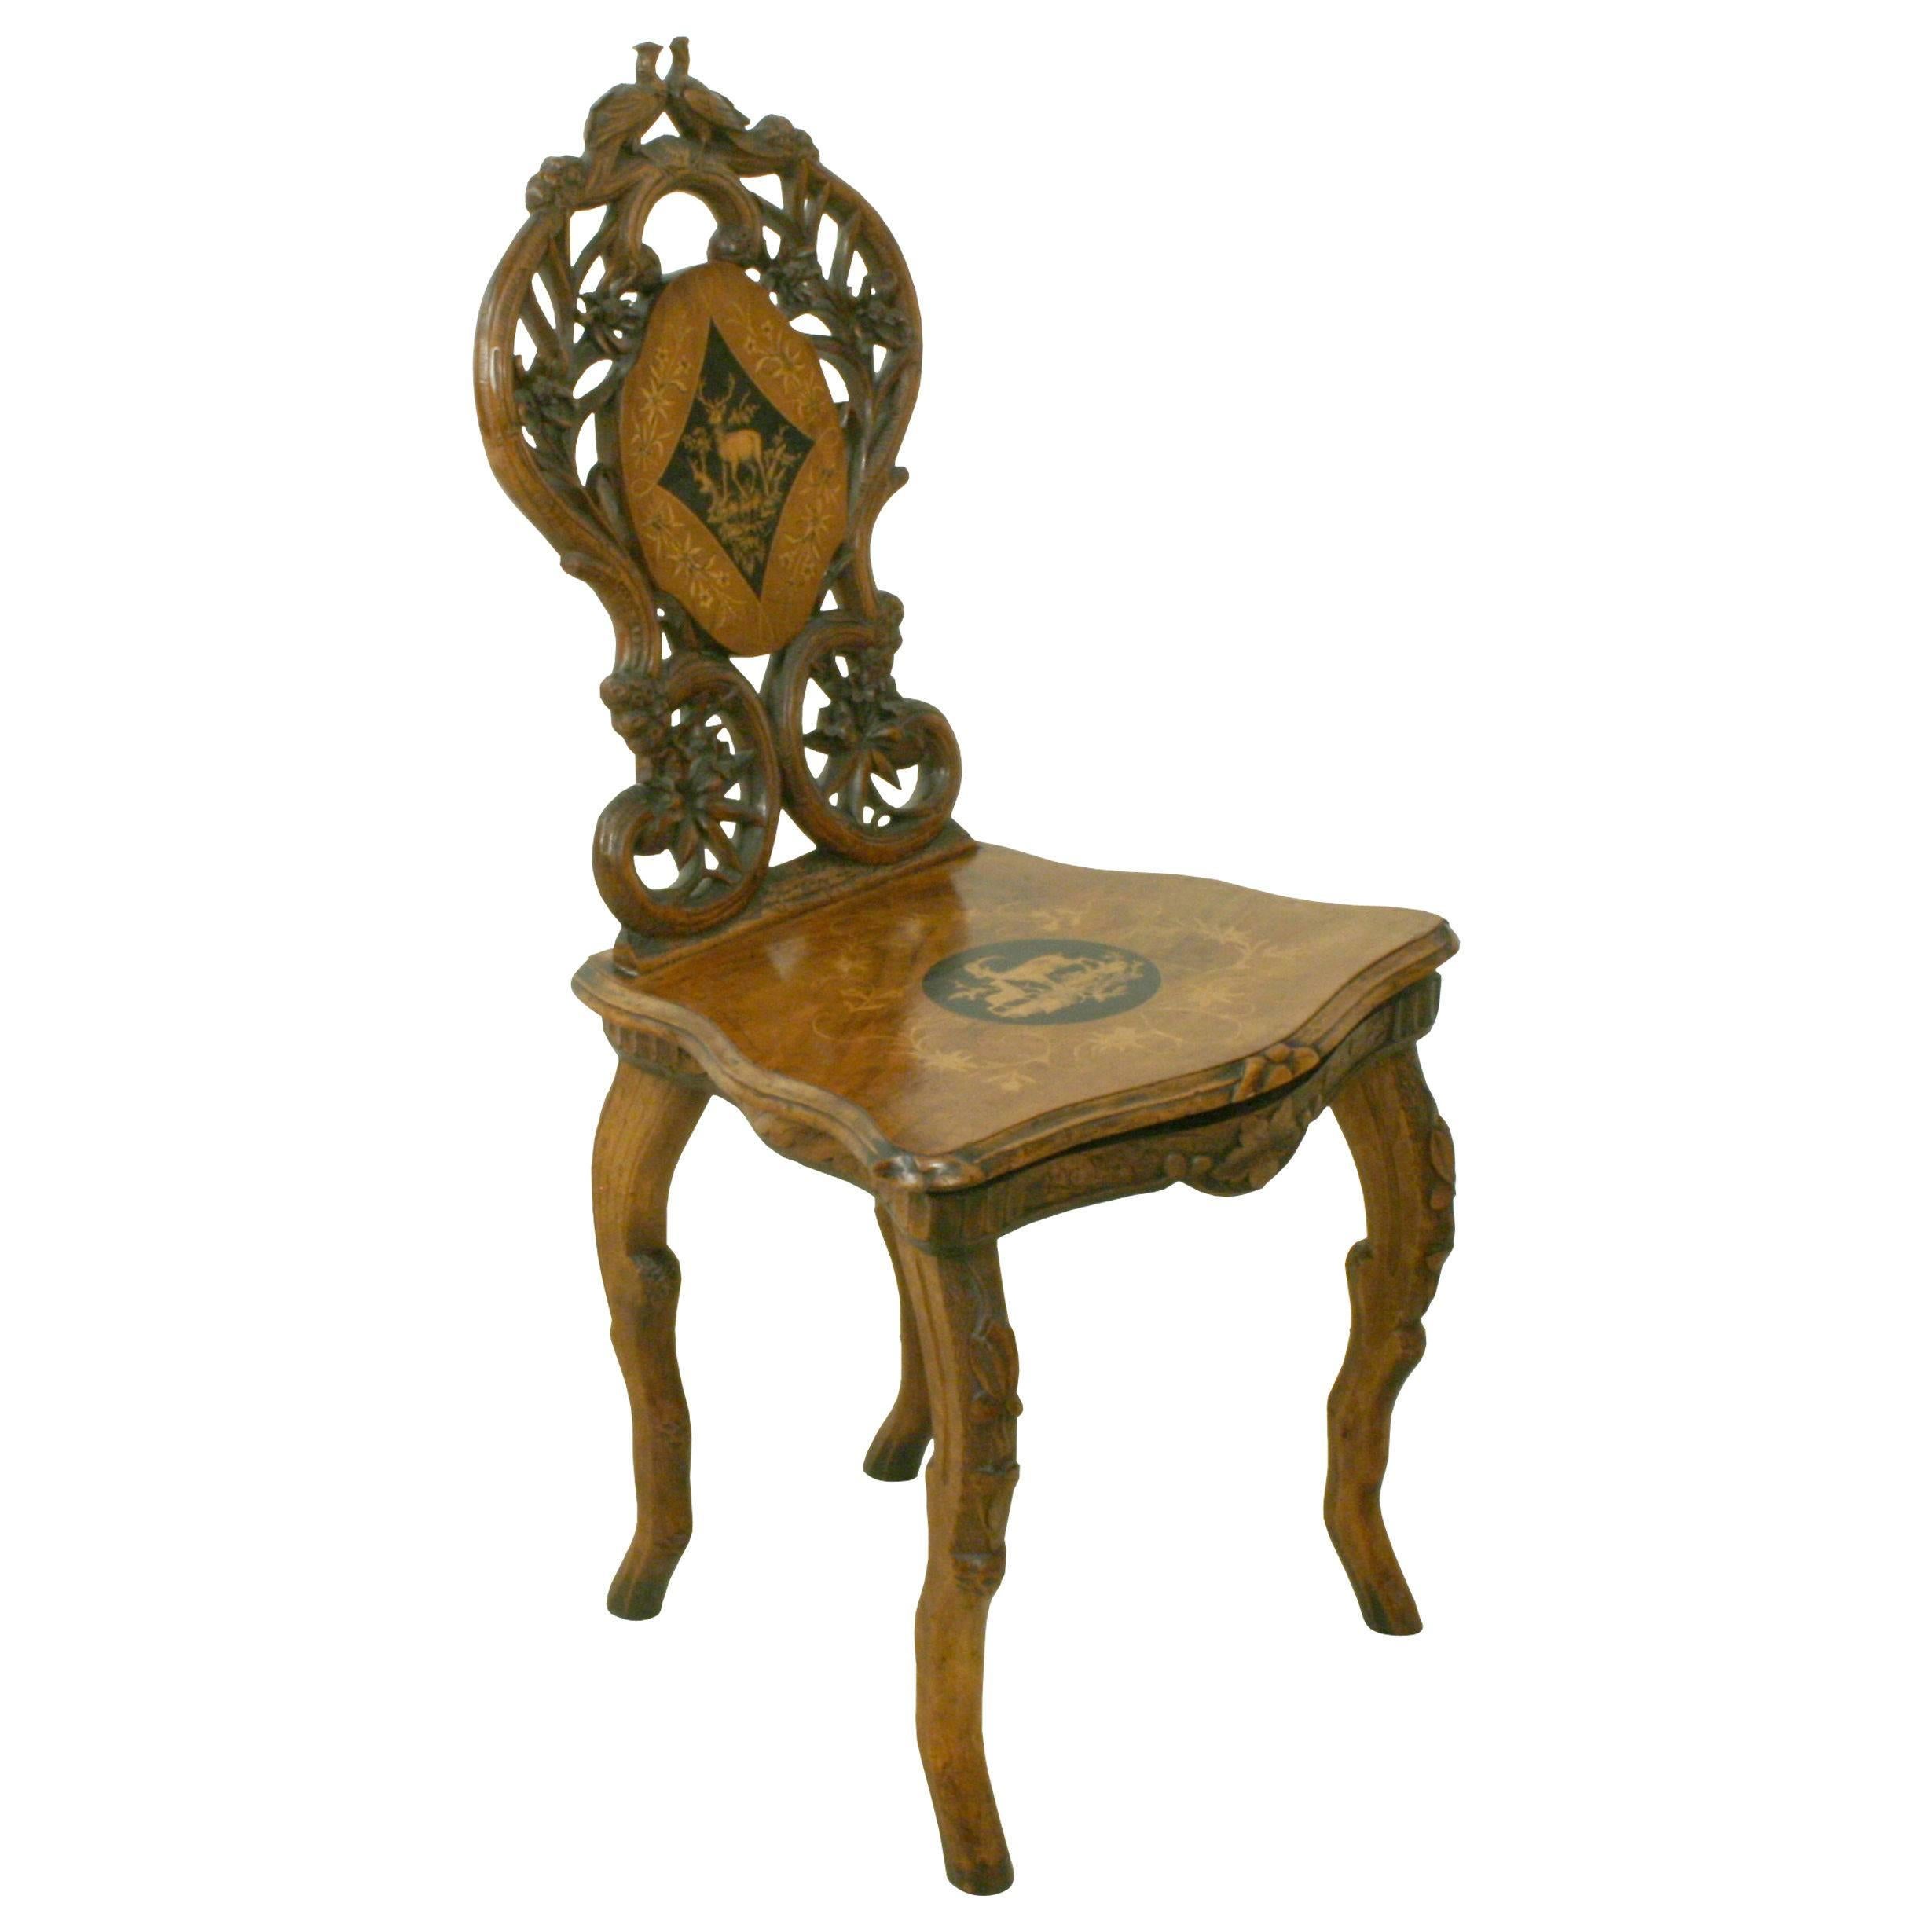 Black Forrest carved wooden musical chair.
A richly carved walnut Black Forest musical chair with pierced back and delicate inlays. The back with central oval portion with inlaid image of a stag and floral designs, outer portion with hand-carved